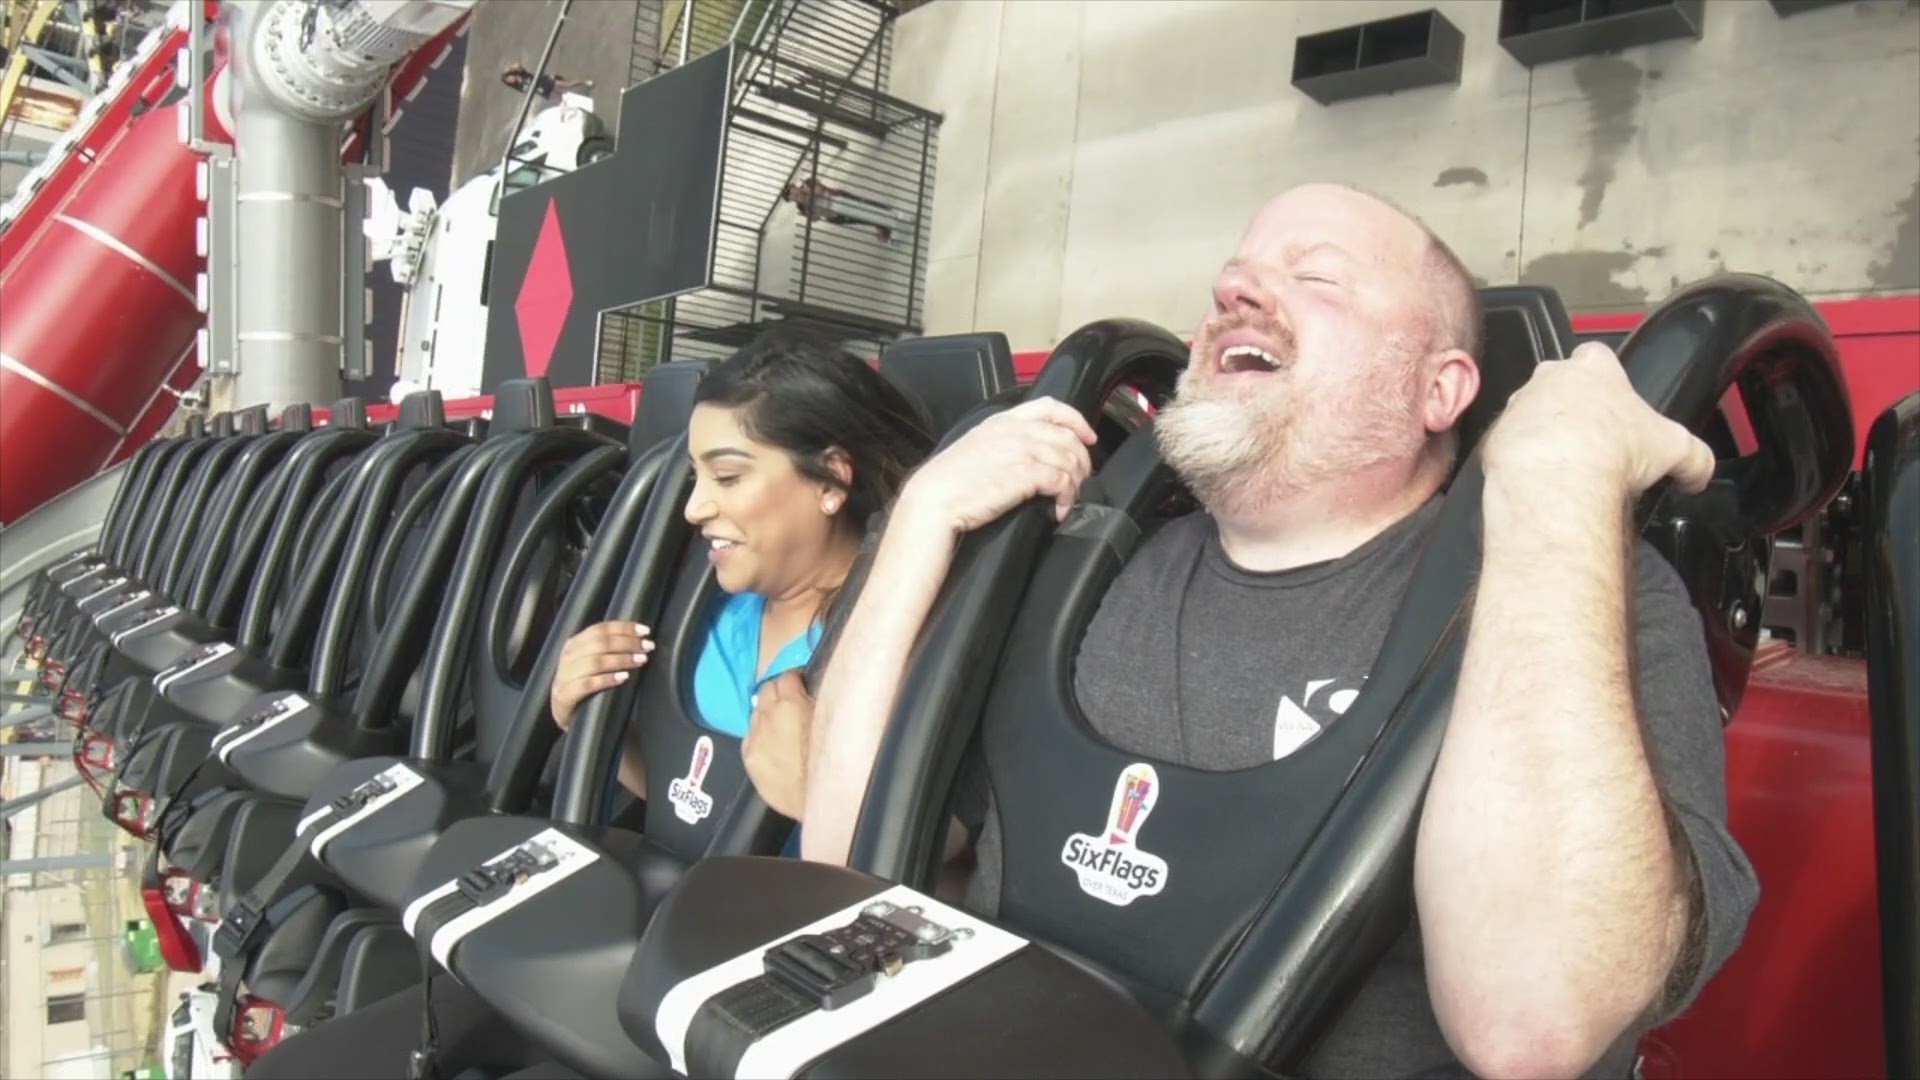 The new ride at Six Flags Over Texas, Harley Quinn Spinsanity, opens this Saturday, July 14, for everyone. A few brave WFAA peeps tried it out.